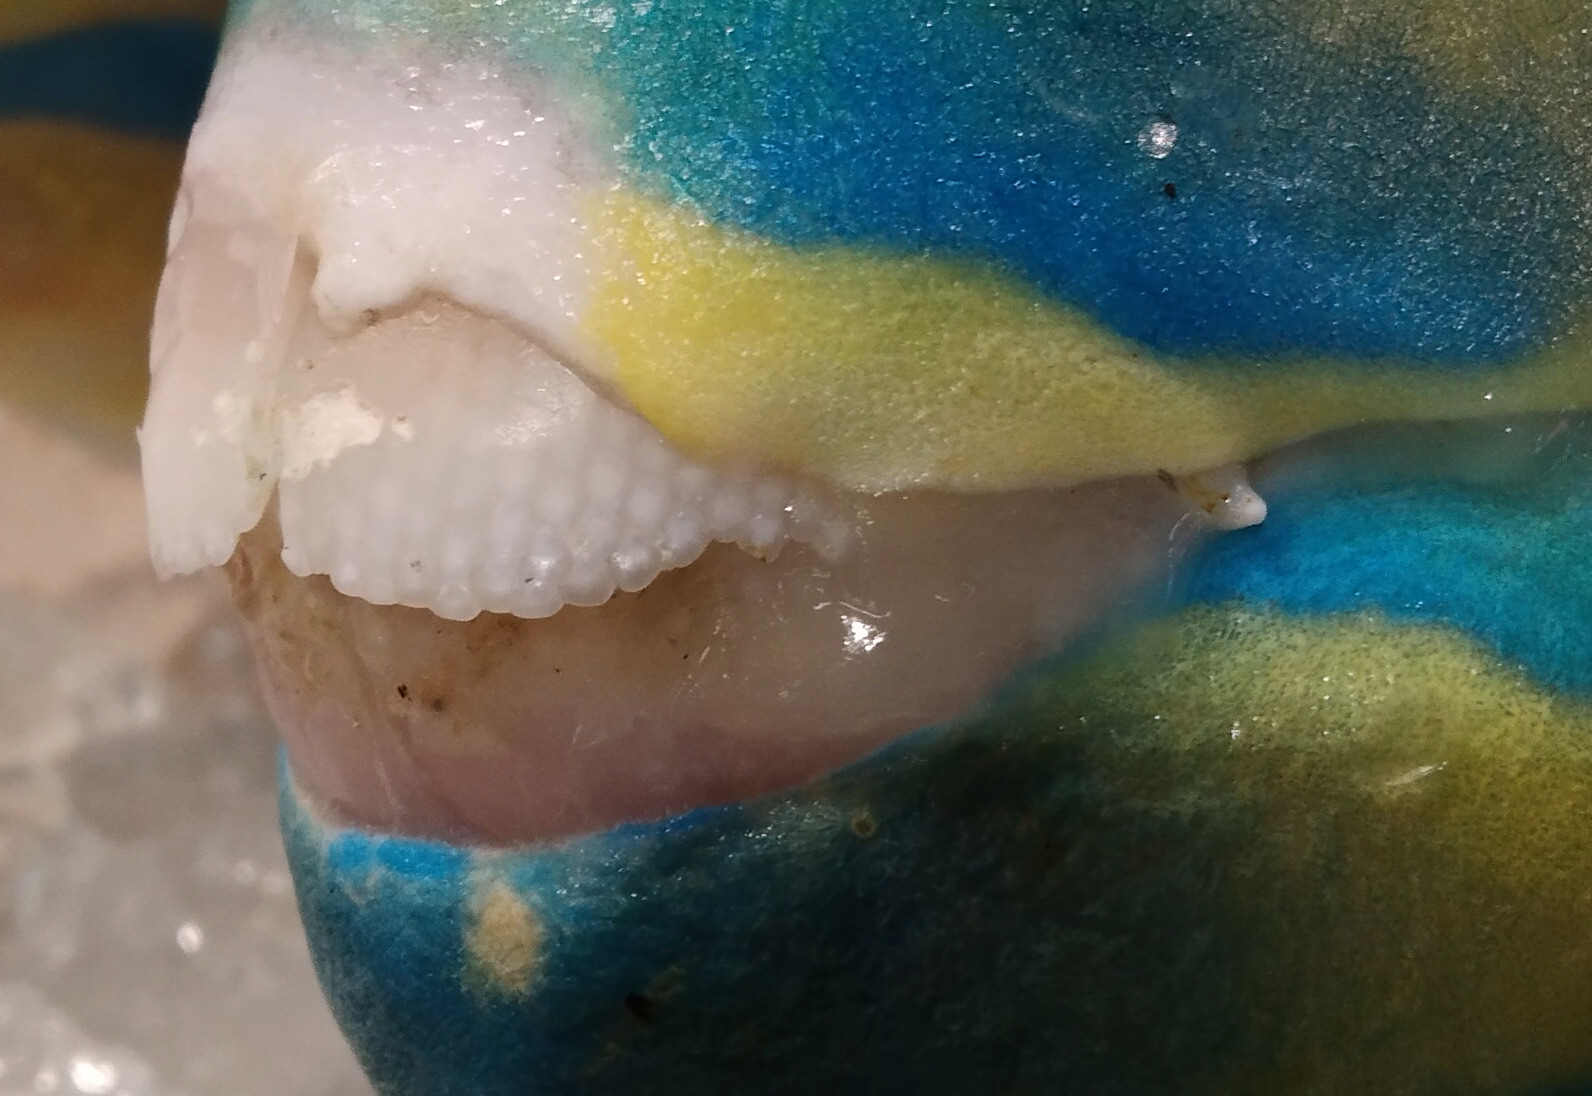 Figure 16. Close-up view on the beak-like teeth structure of parrotfish.